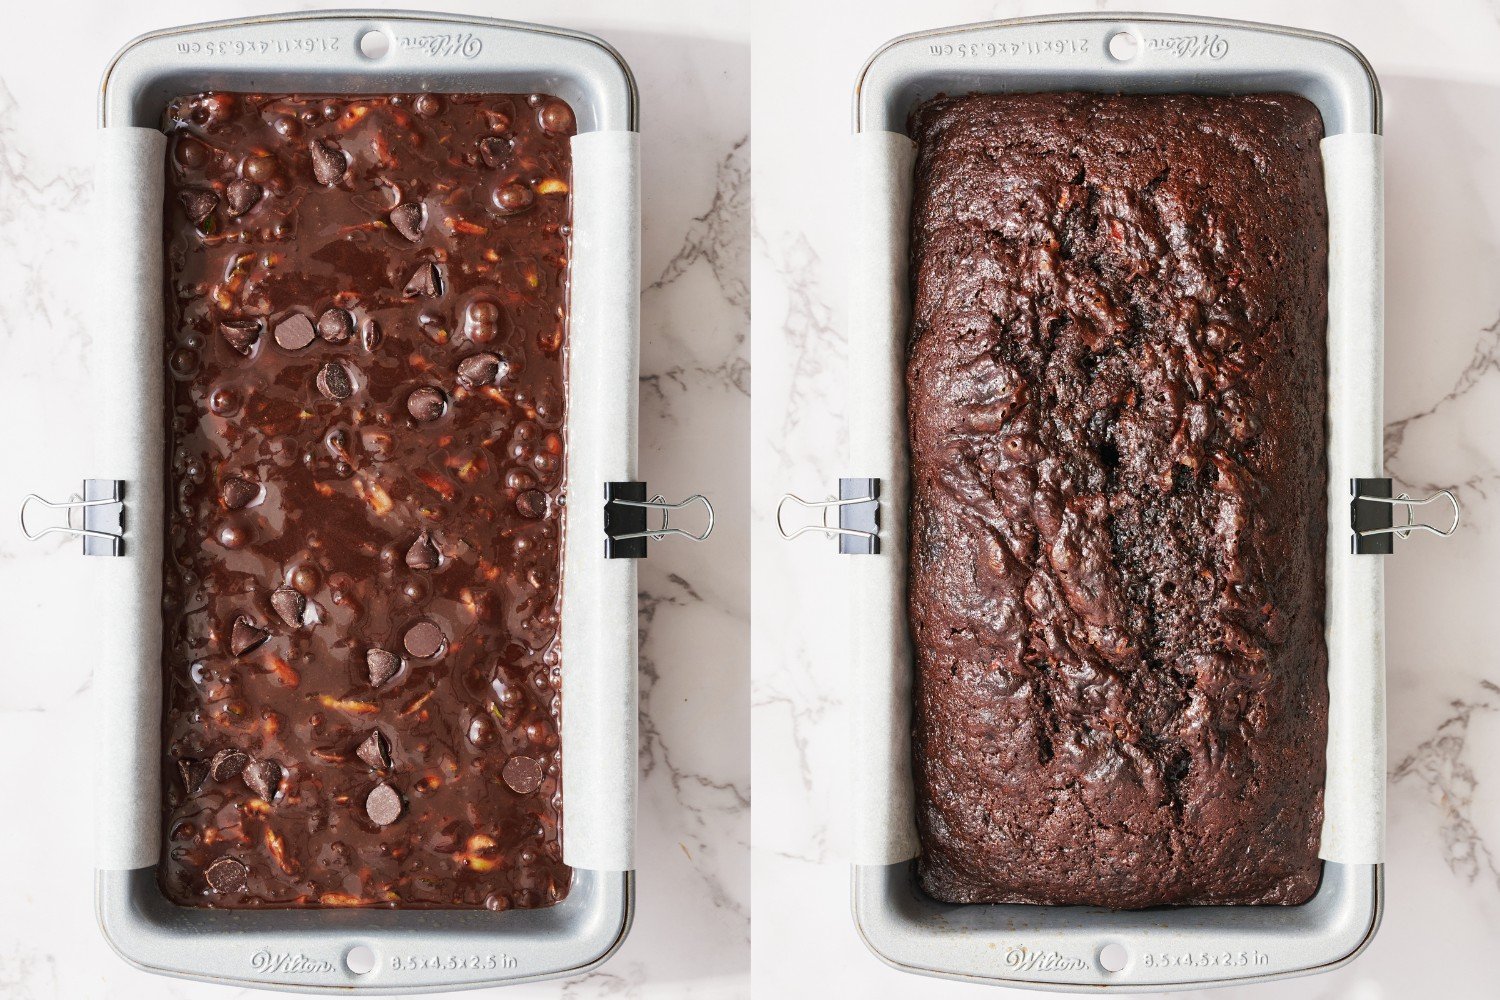 side-by-side images of the unbaked zucchini bread next to the baked zucchini bread.